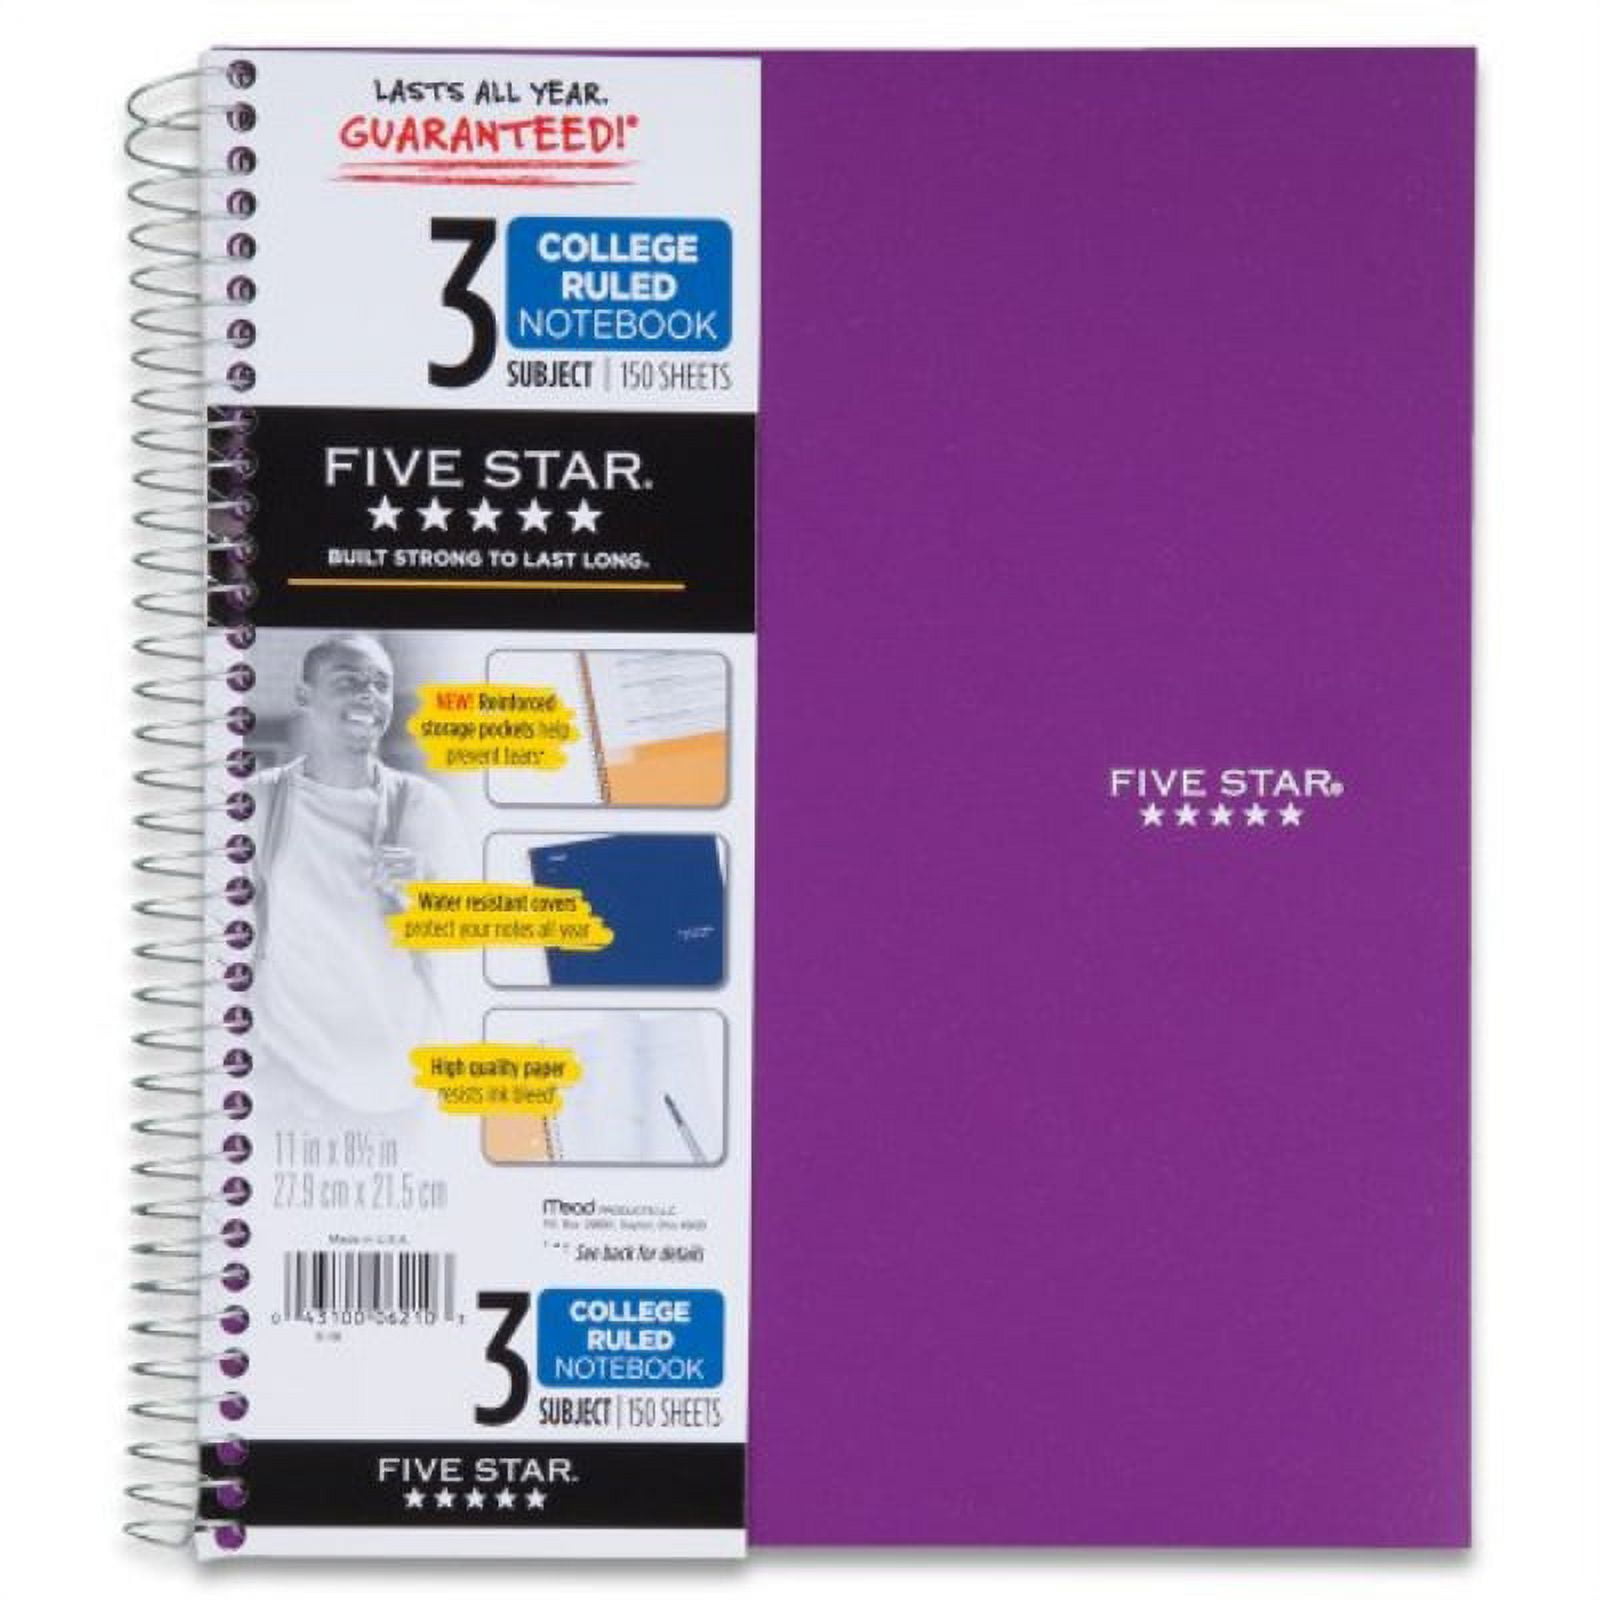 Left-Handed Lefty Sayings Three Subject Spiral Notebook, 1